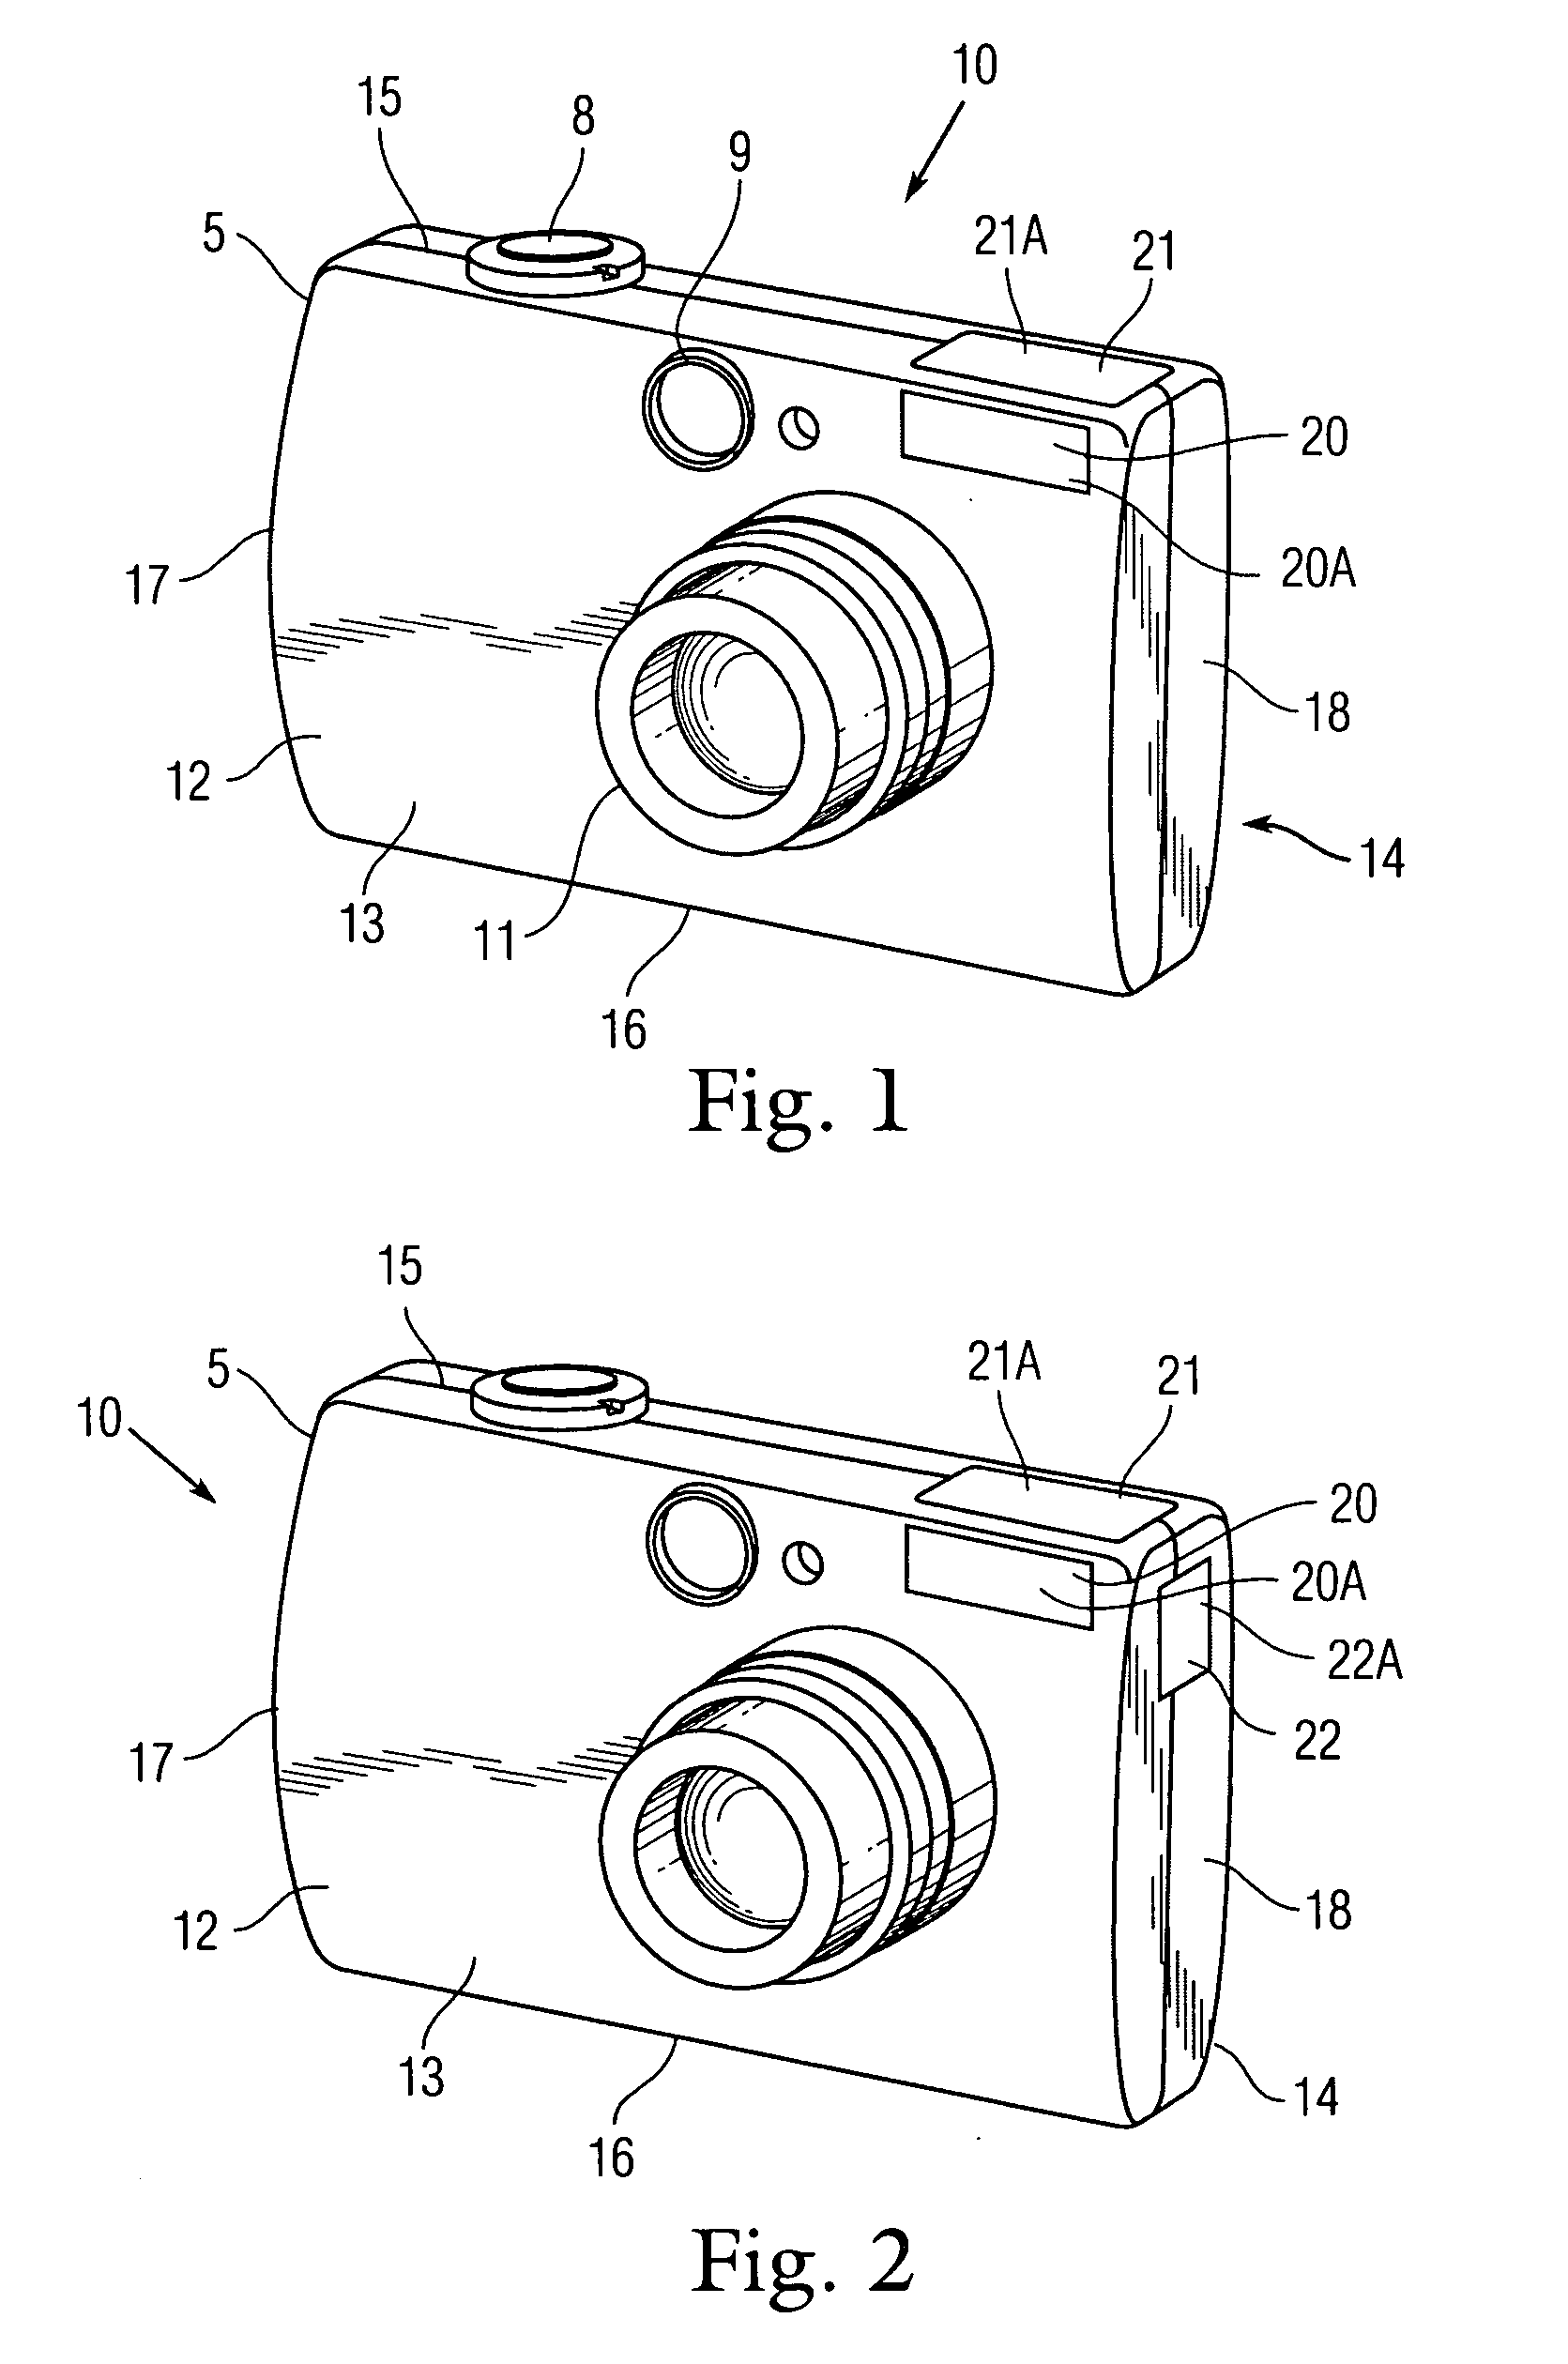 Camera integrated with direct and indirect flash units